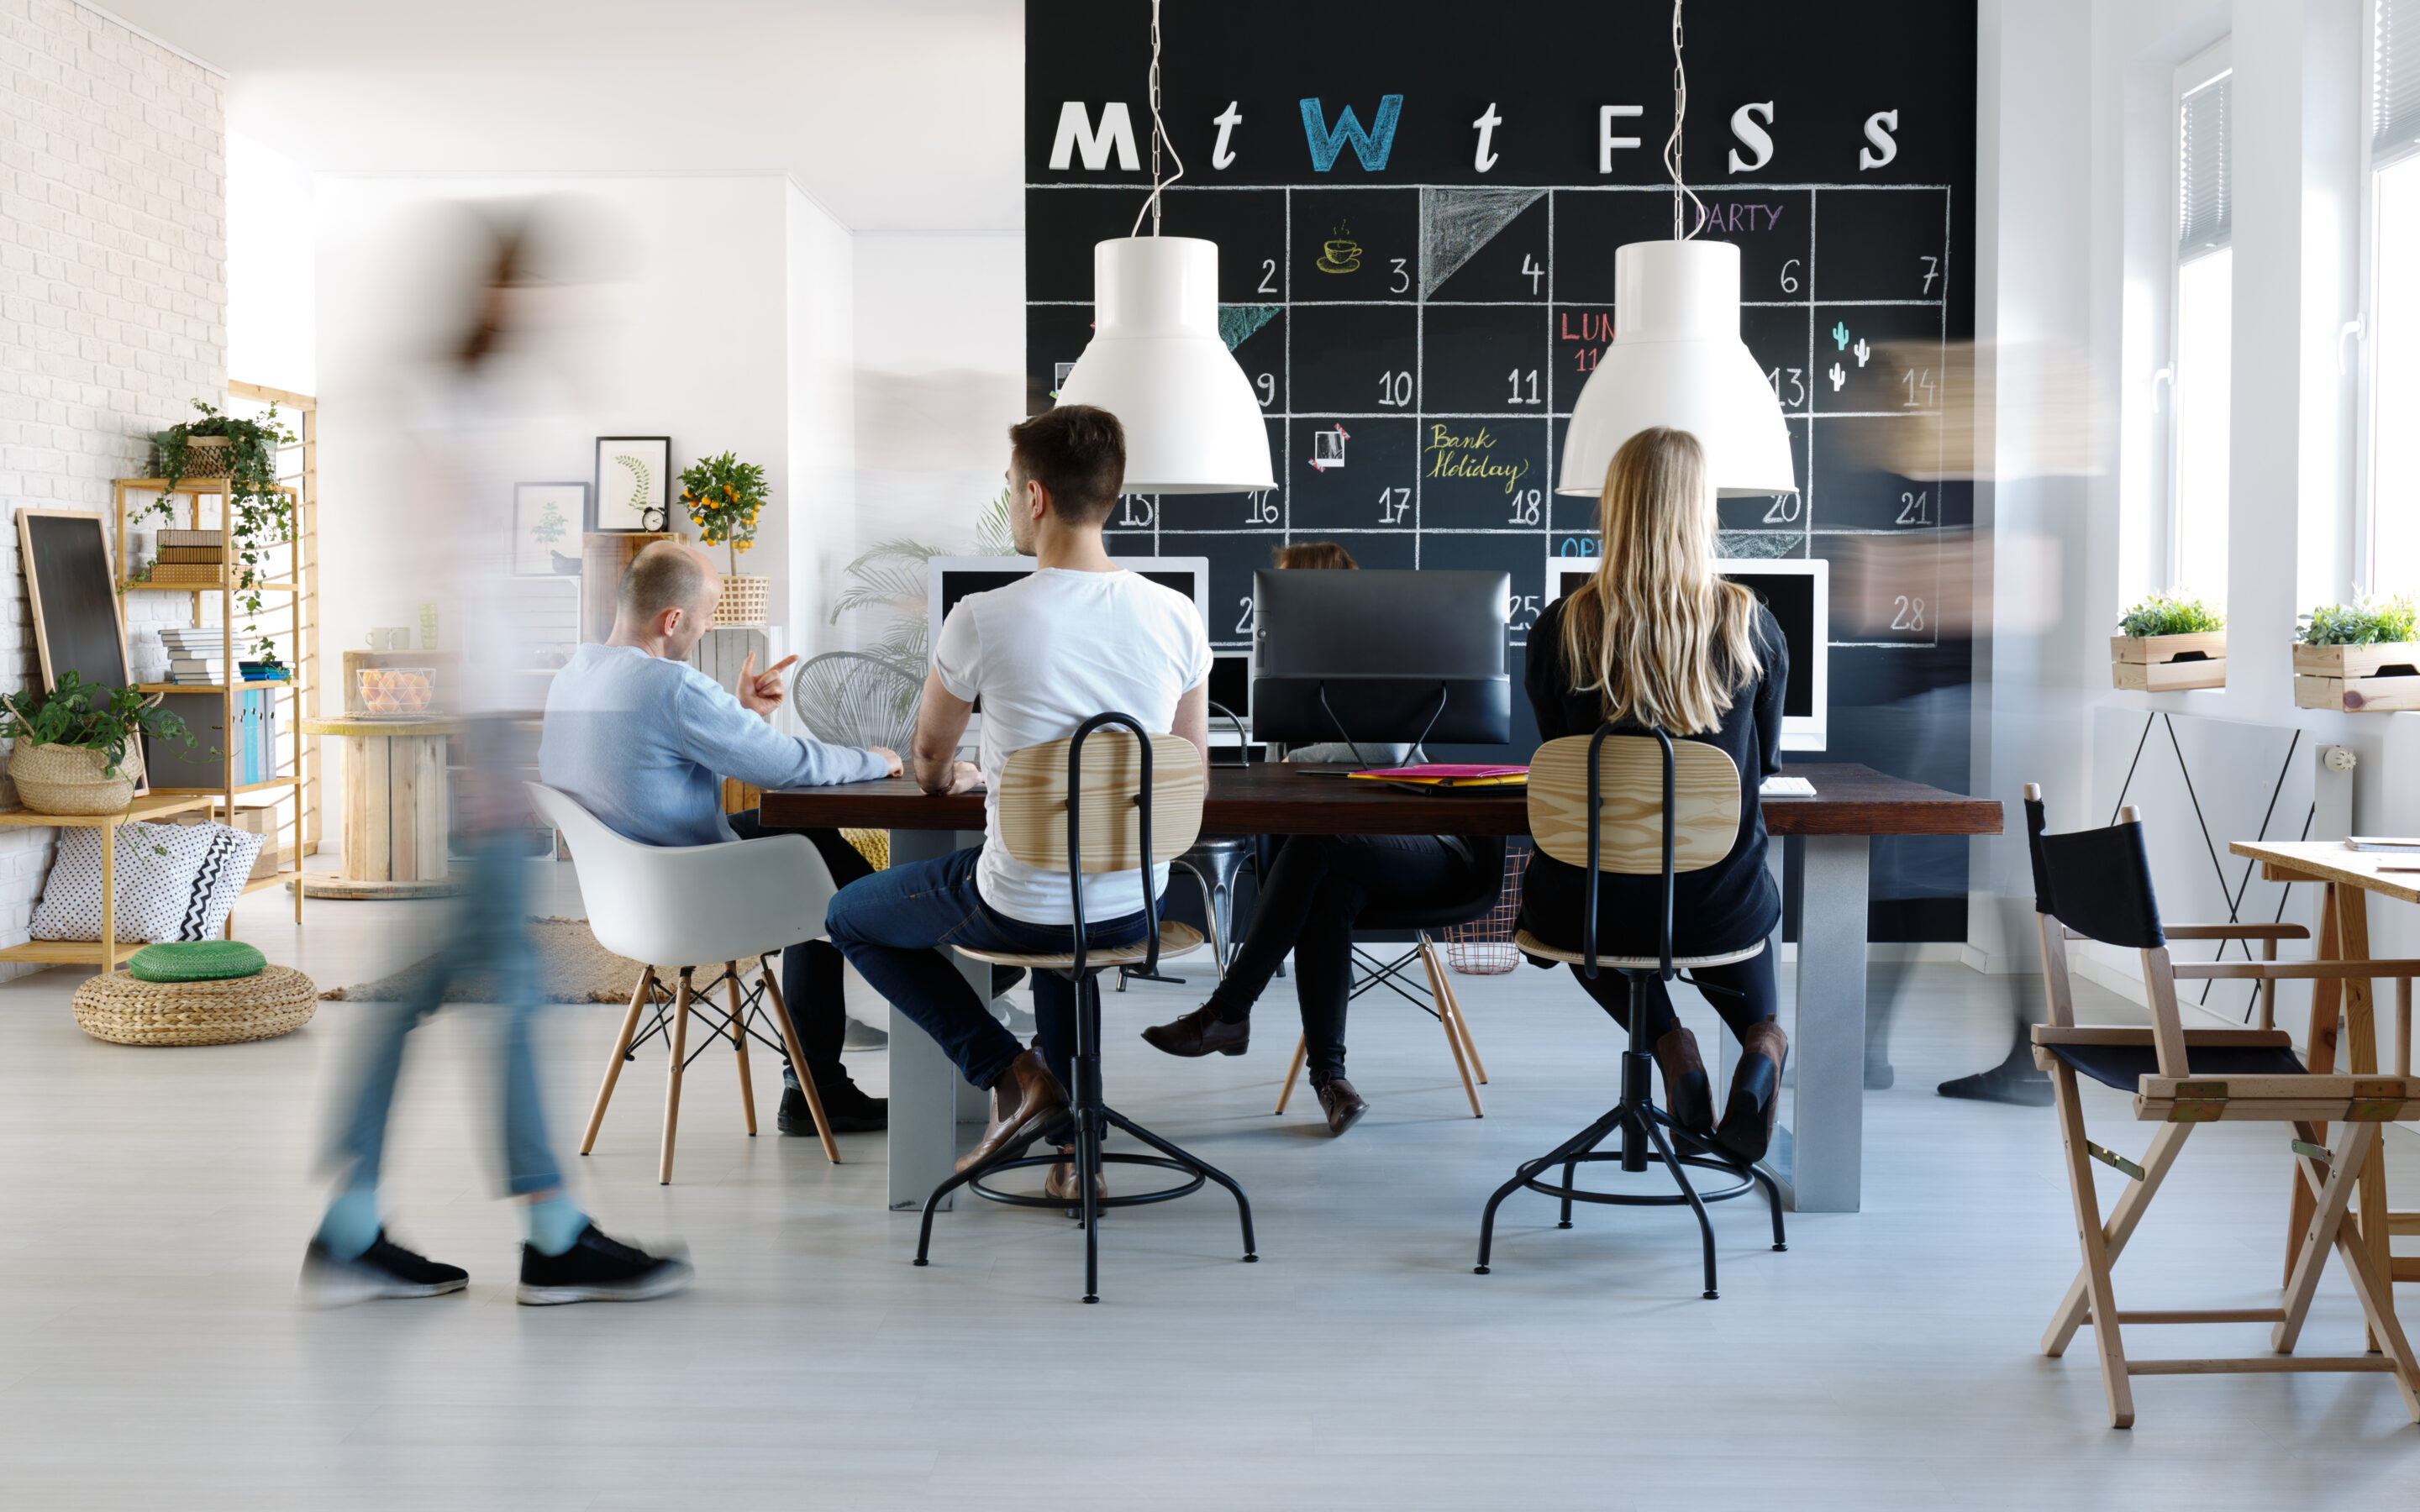 How to Name and Brand Your Coworking Space